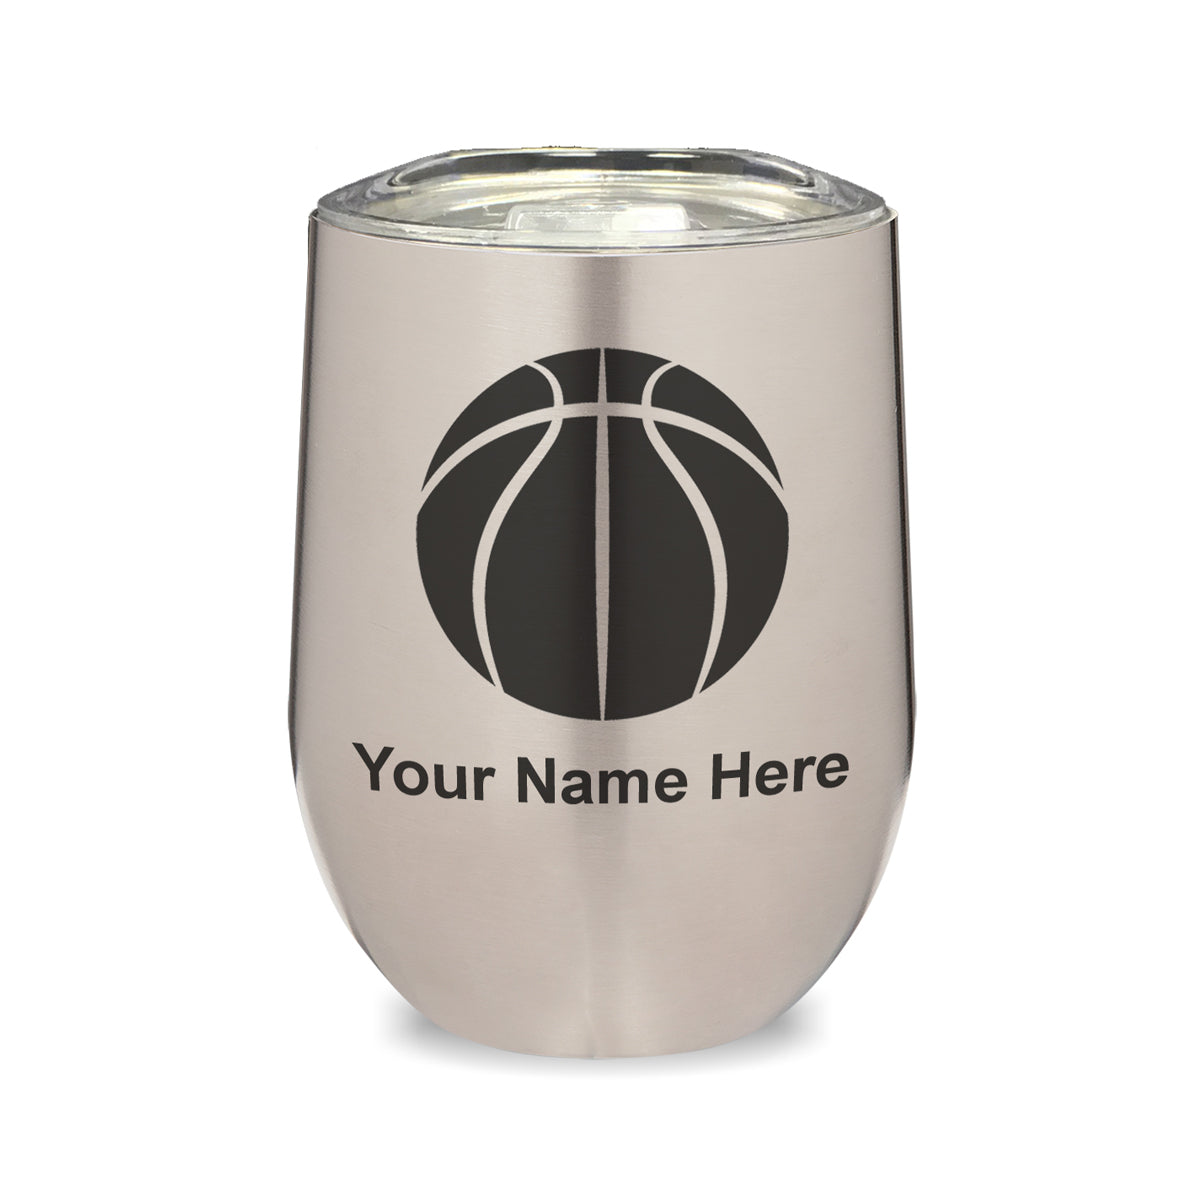 LaserGram Double Wall Stainless Steel Wine Glass, Basketball Ball, Personalized Engraving Included